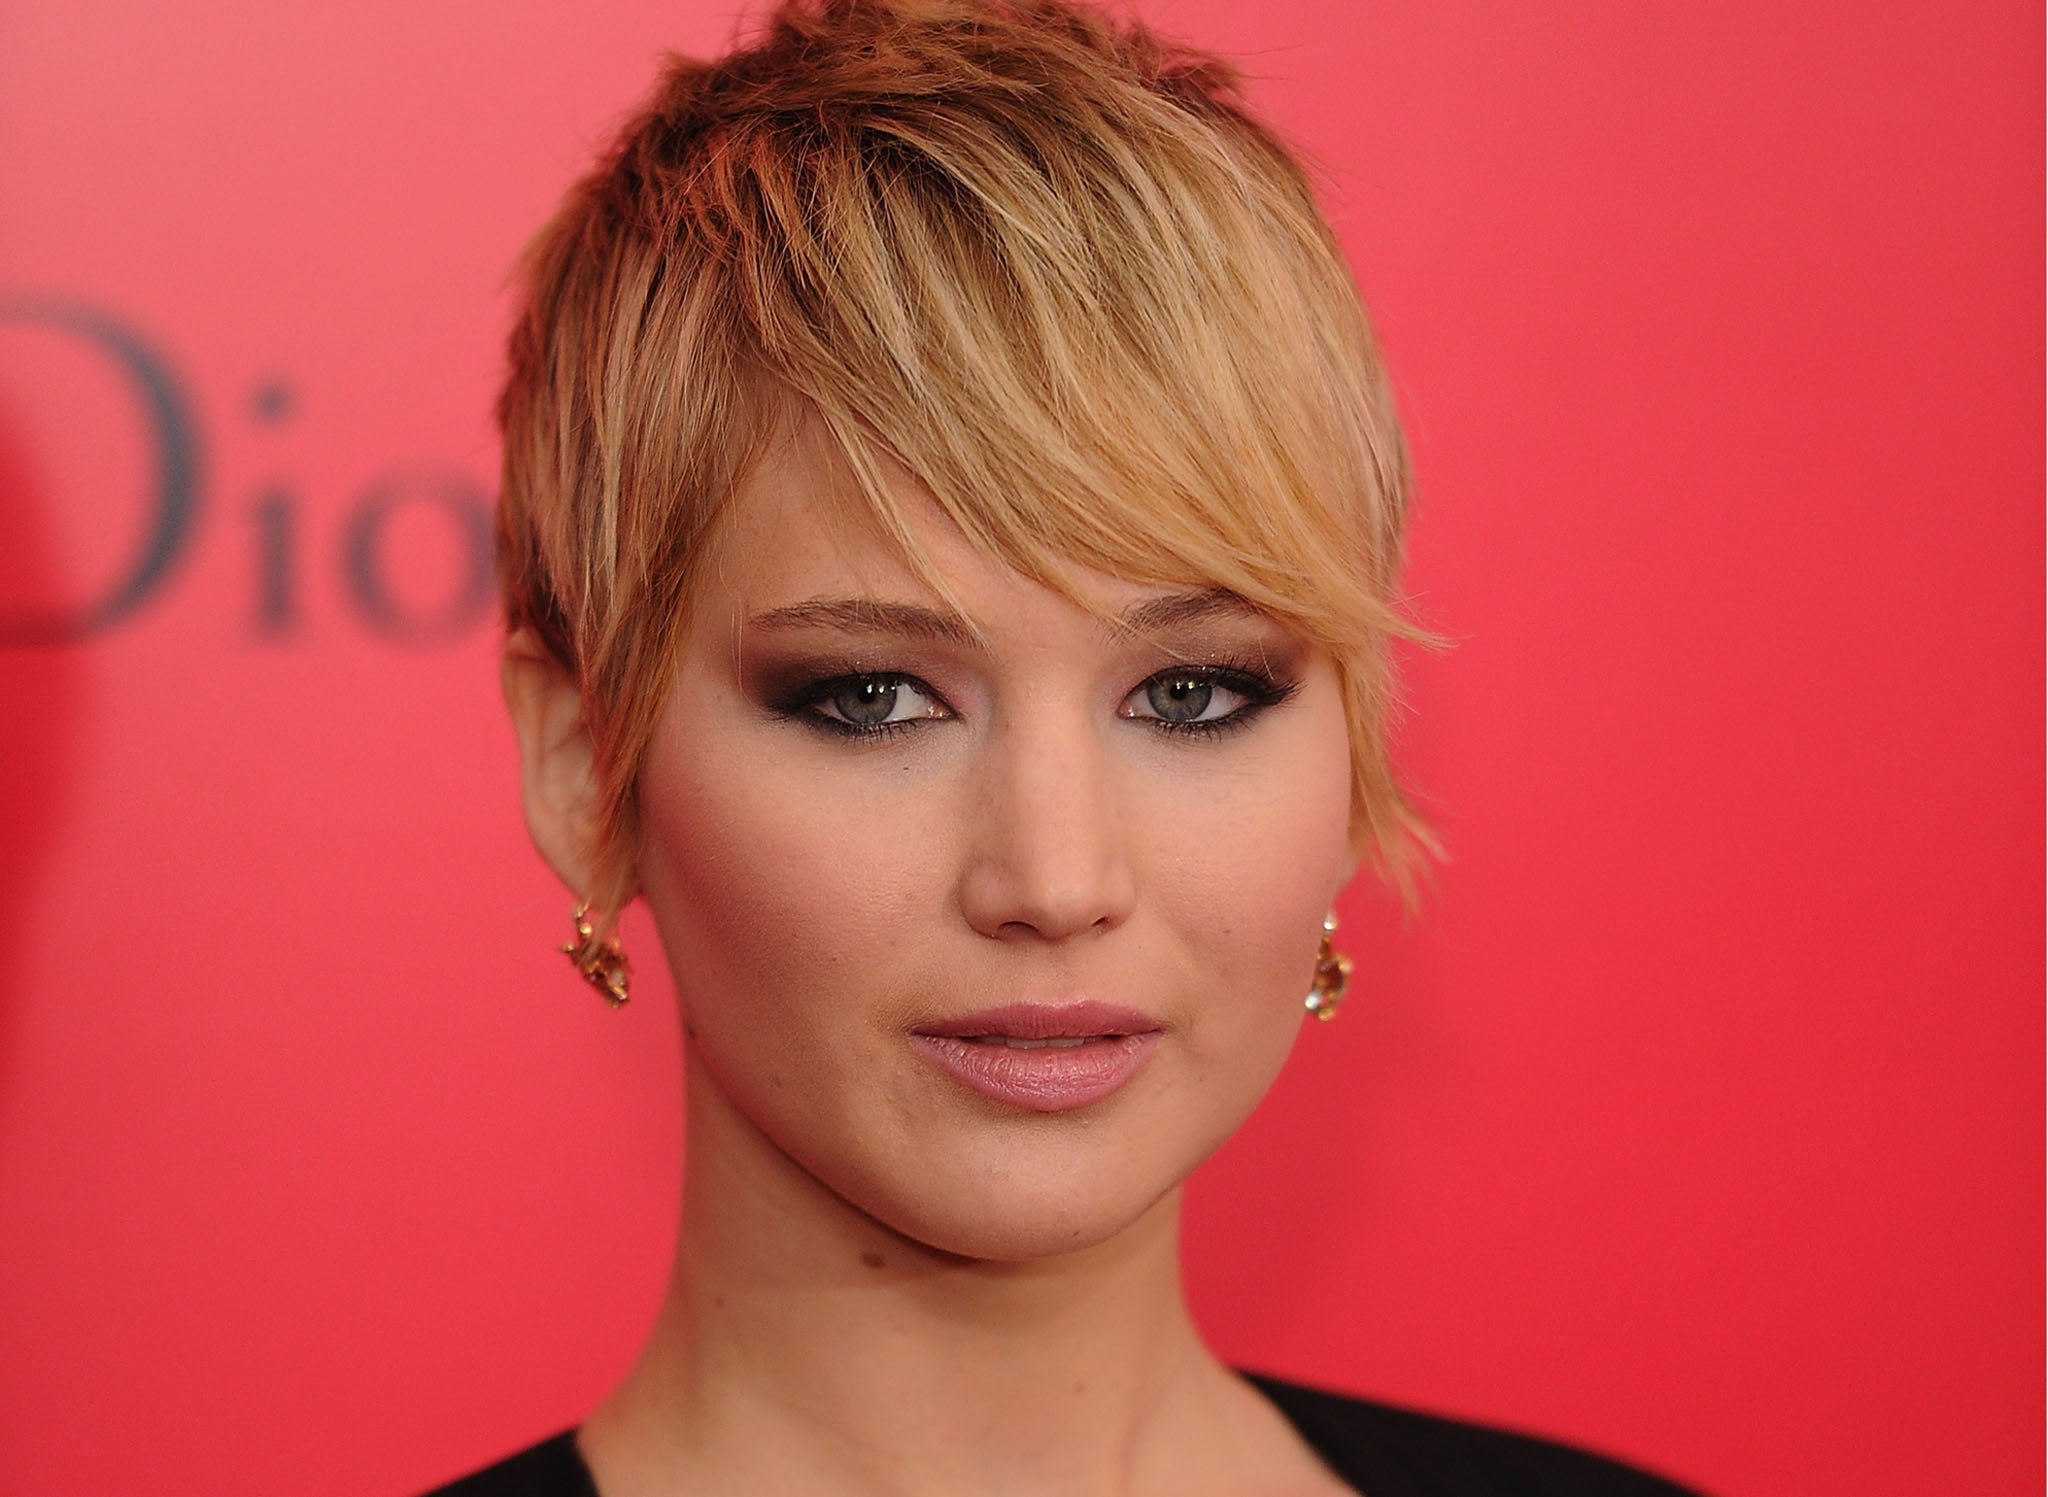 Jennifer Lawrence Celebrity Porn - Jennifer Lawrence nude photos leak: FBI and Apple to investigate hacking of  iCloud | The Independent | The Independent